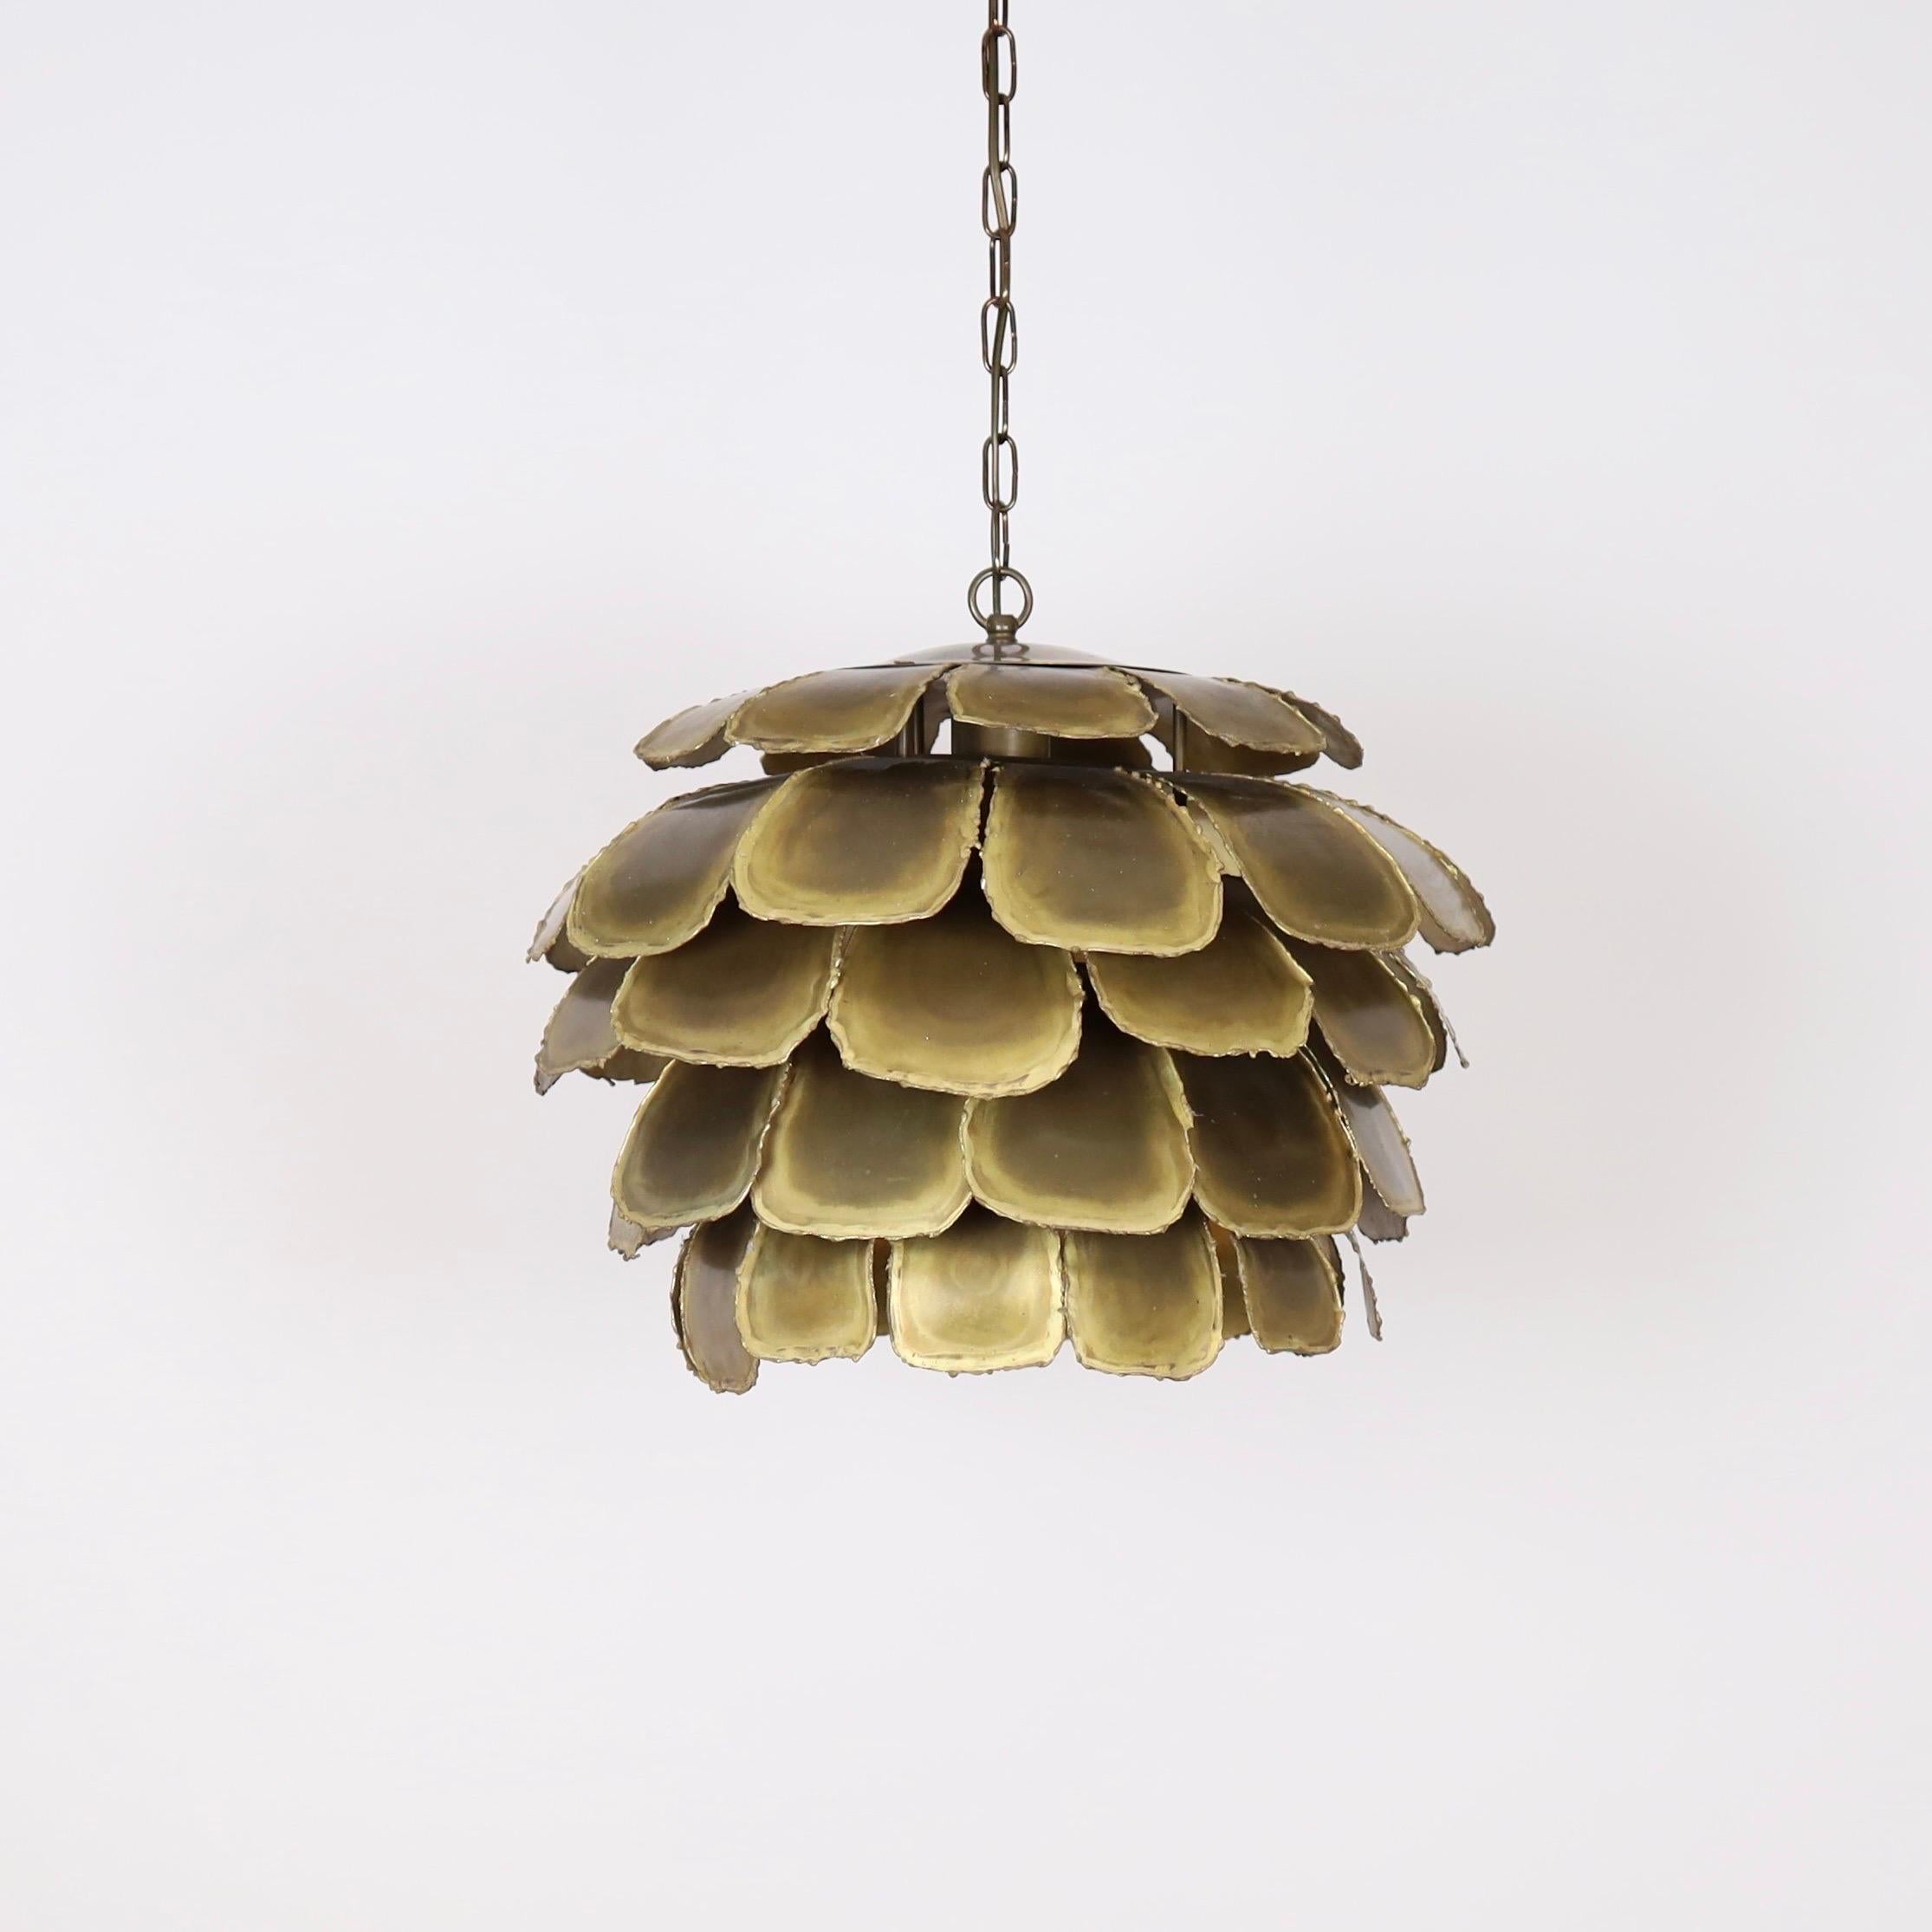 A substantial Artichoke pendant light designed Svend Aage Holm Sørensen in the 1960s. Made to impress. 

* A pendant light with layered flame-cut brass slates
* Designer: Svend Aage Holm Sørensen
* Type: 6435 (“Artichoke”)
* Producer: Holm Sørensen